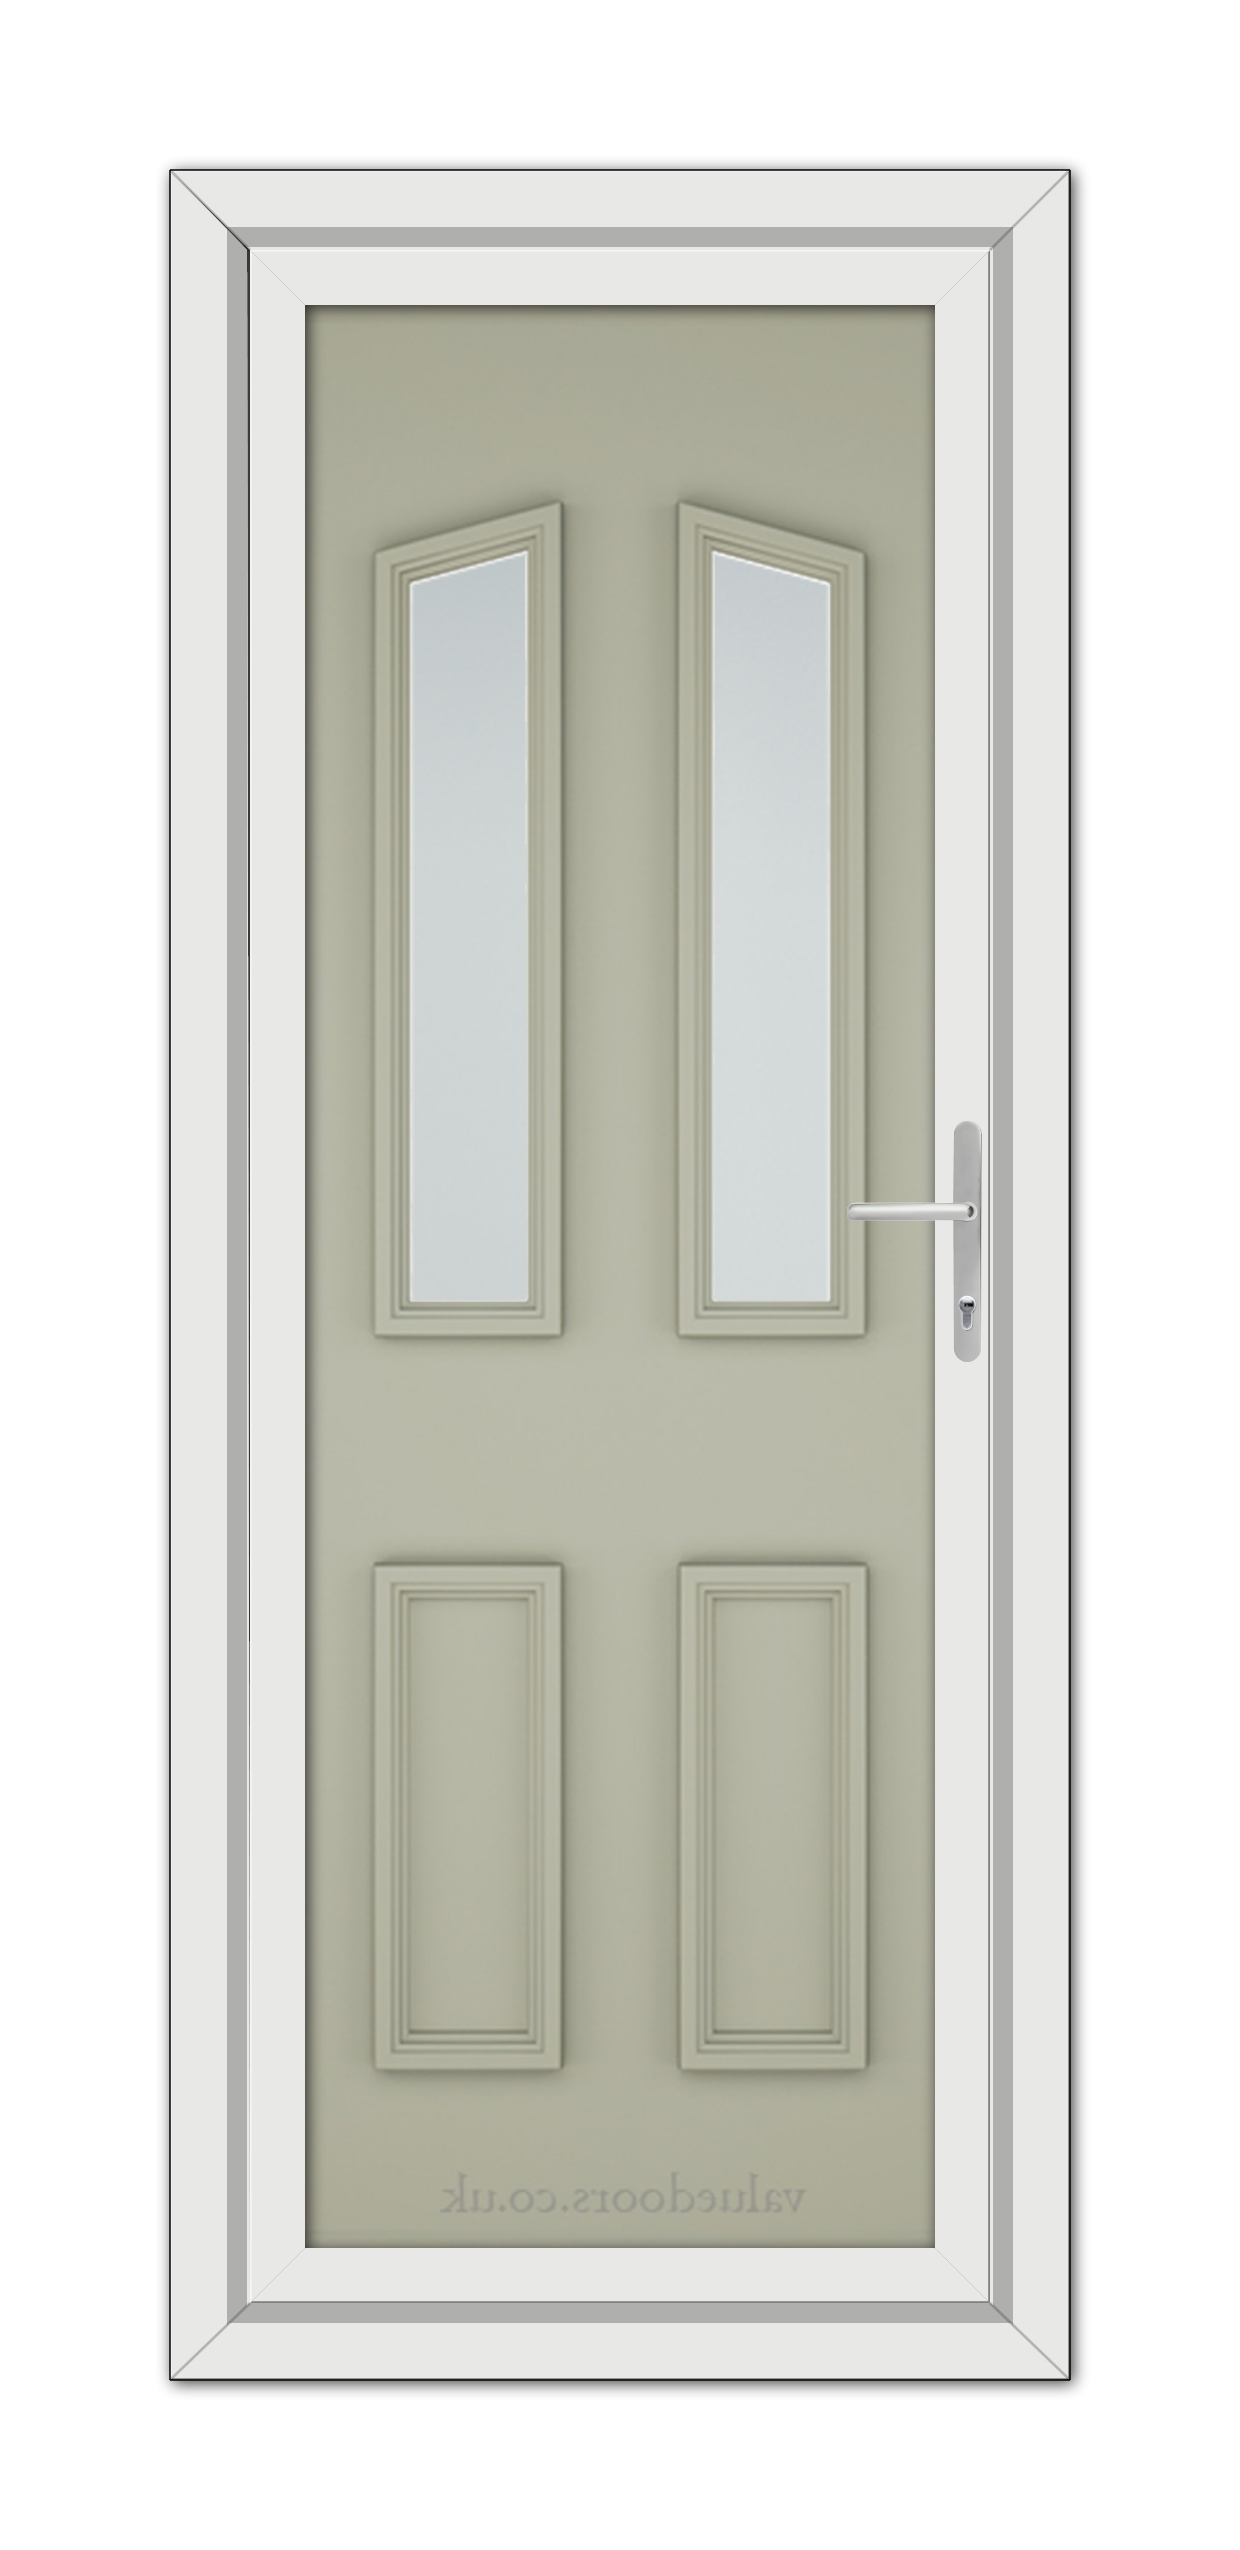 Agate Grey Kensington uPVC Door with long vertical glass panels and a silver handle, set in a white frame.